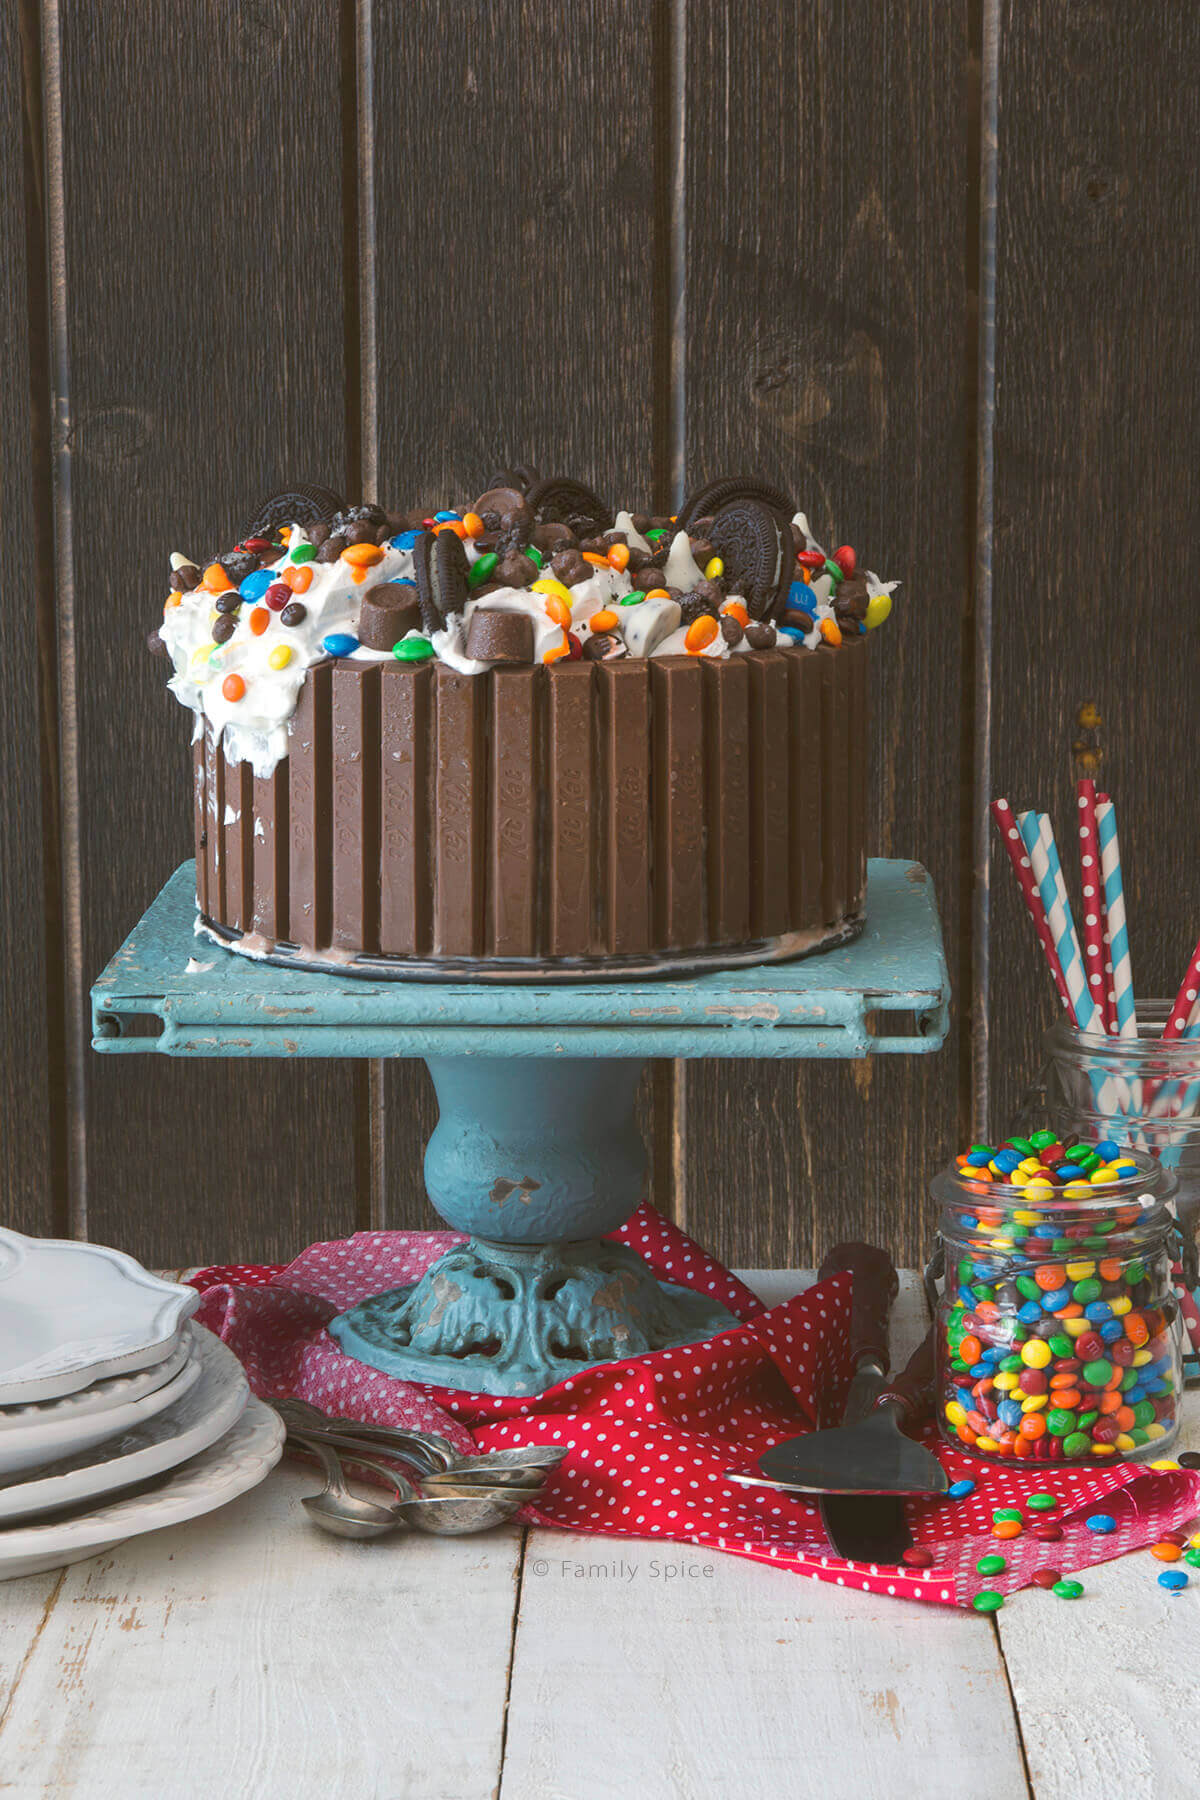 Ice cream cake surrounded by Kit Kats and topped with candies and cookies on a cake stand